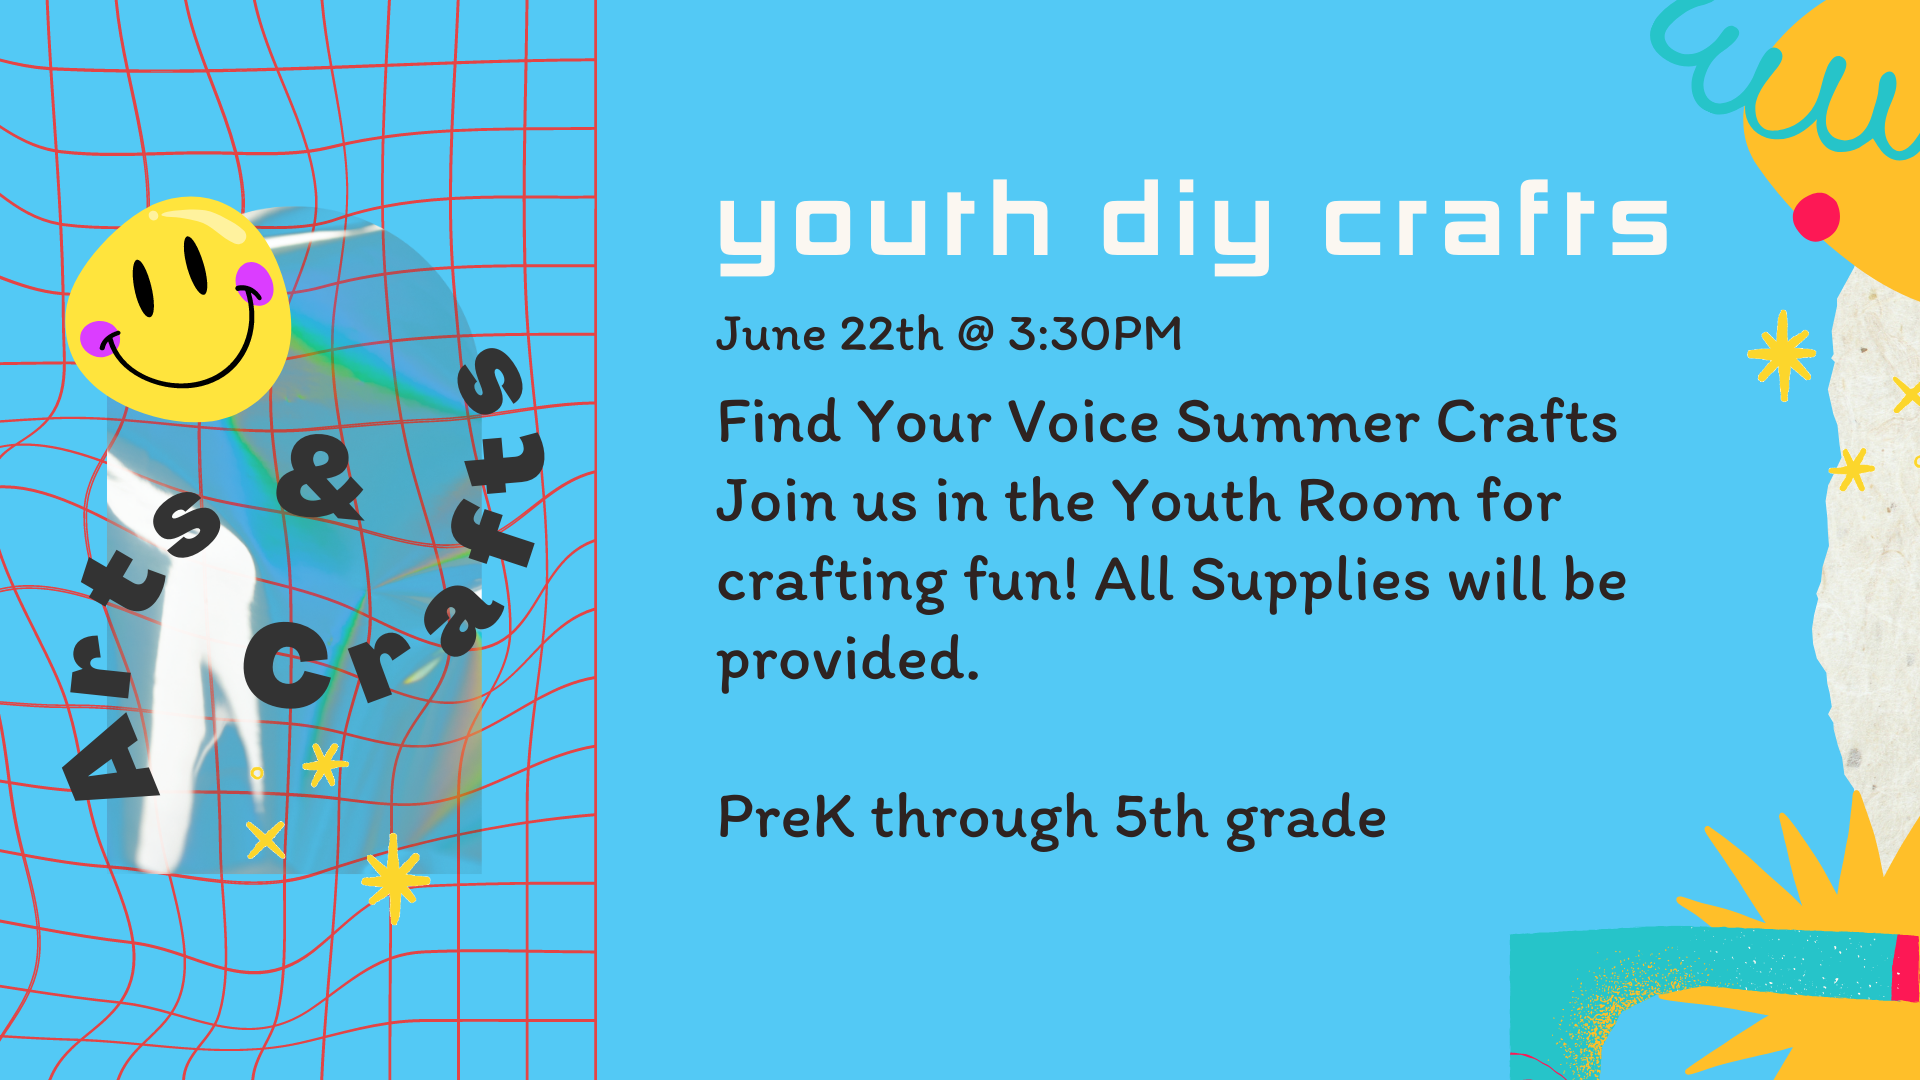 Youth DIY Crafts: Find Your Voice Summer Crafts June 22nd 3:30 PM   